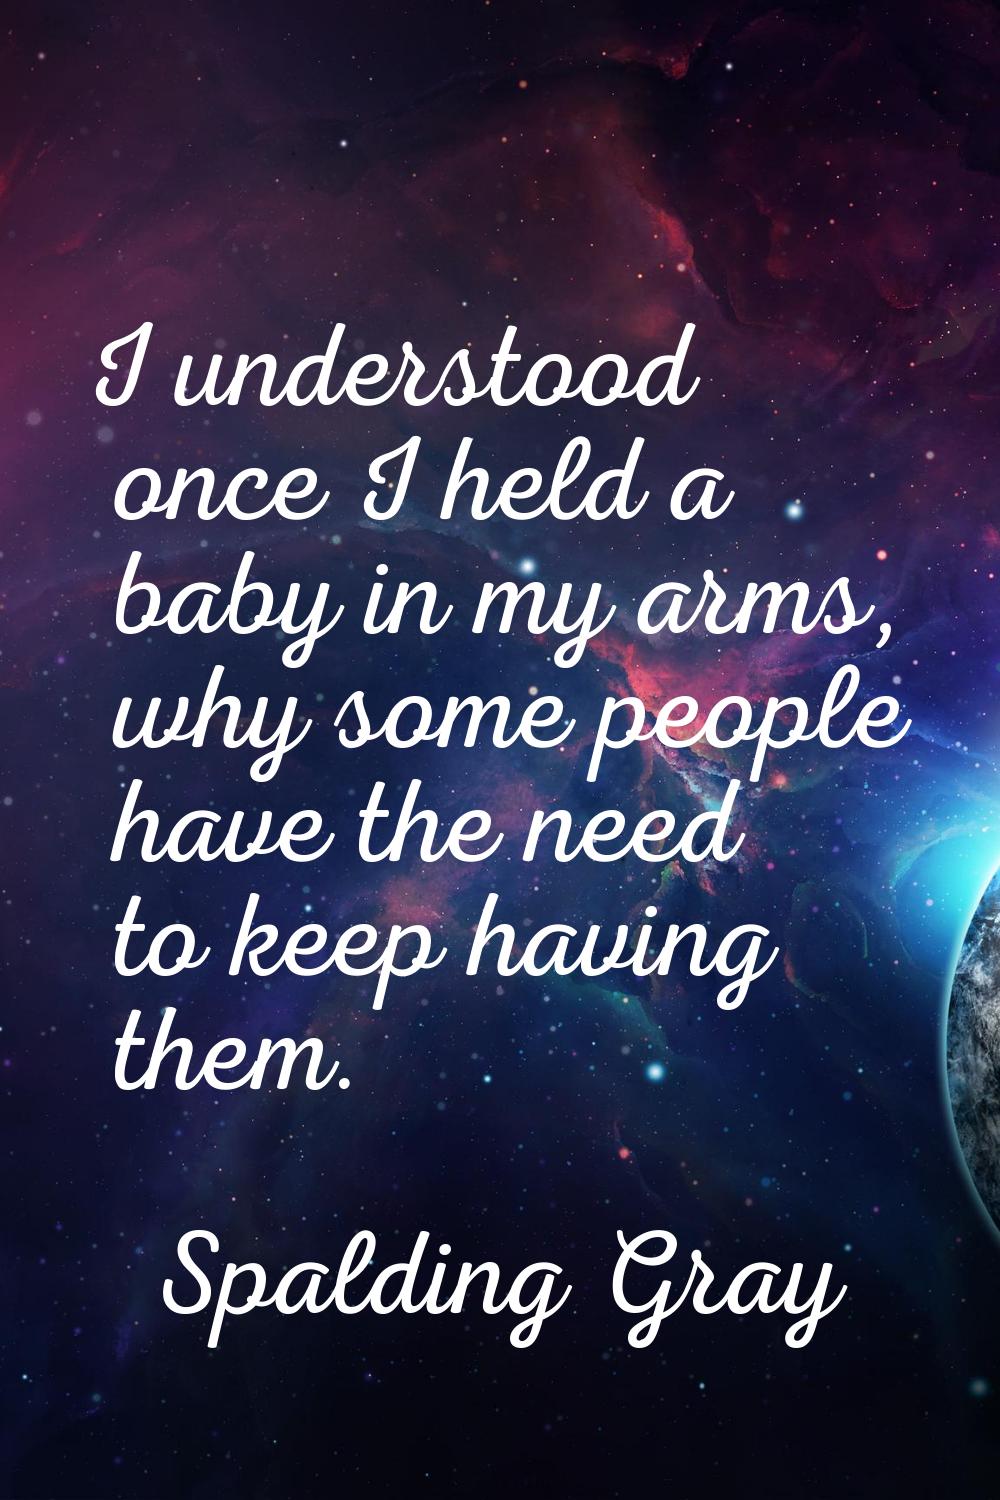 I understood once I held a baby in my arms, why some people have the need to keep having them.